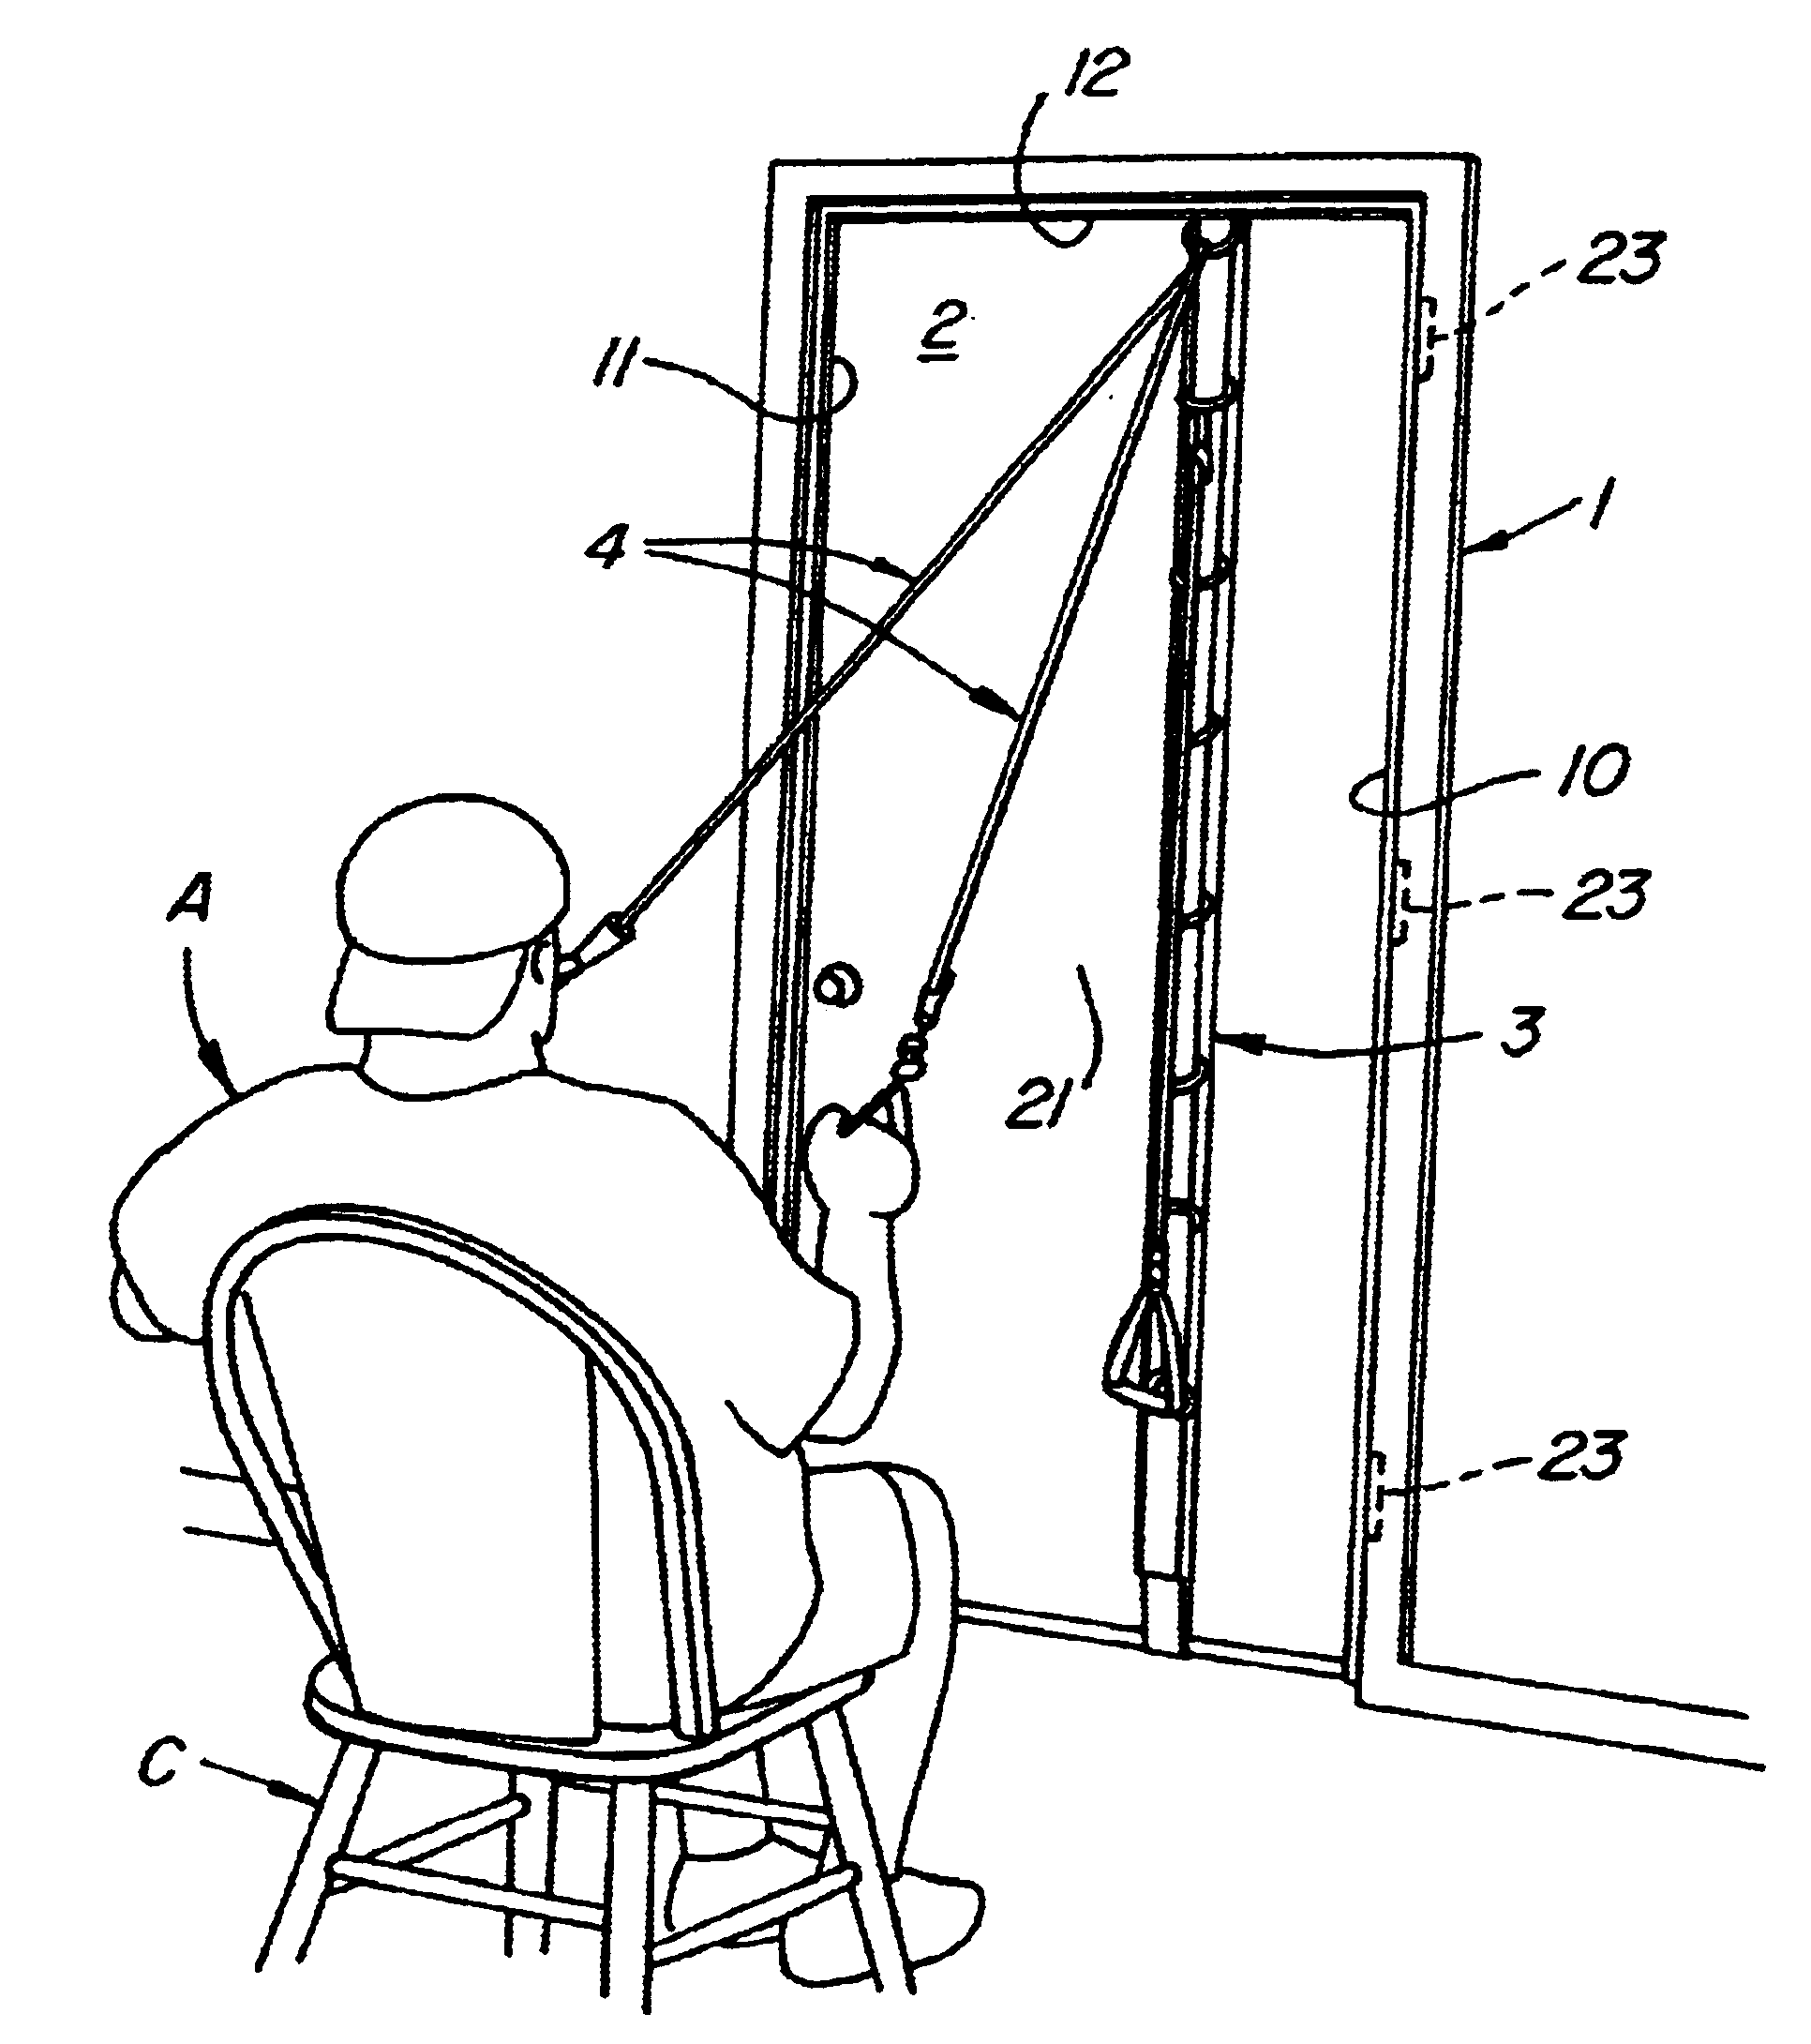 Door mounted deadman for exercise devices